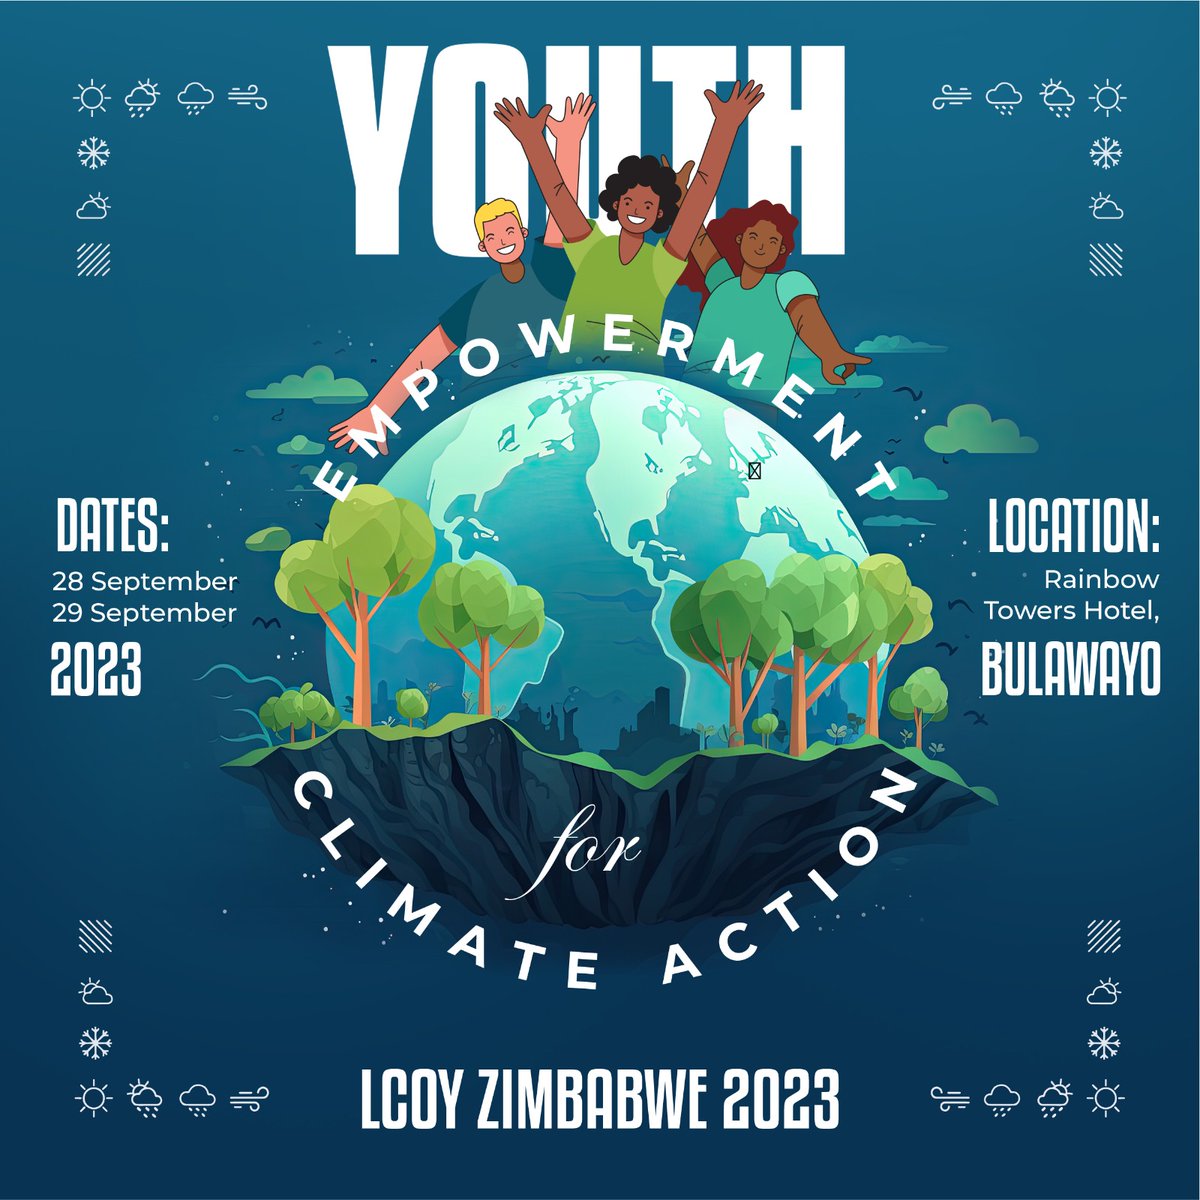 we are in #Bulawayo for the Local Conference Of Children & Youth #LCOYZim23. A youth led initiative by #young people for young people. We will engage  & seek alternative solutions to the #Climatecrisis grateful to @UNICEFZIMBABWE @UNDPZimbabwe @ActionAidZim  @ClimateZimDept